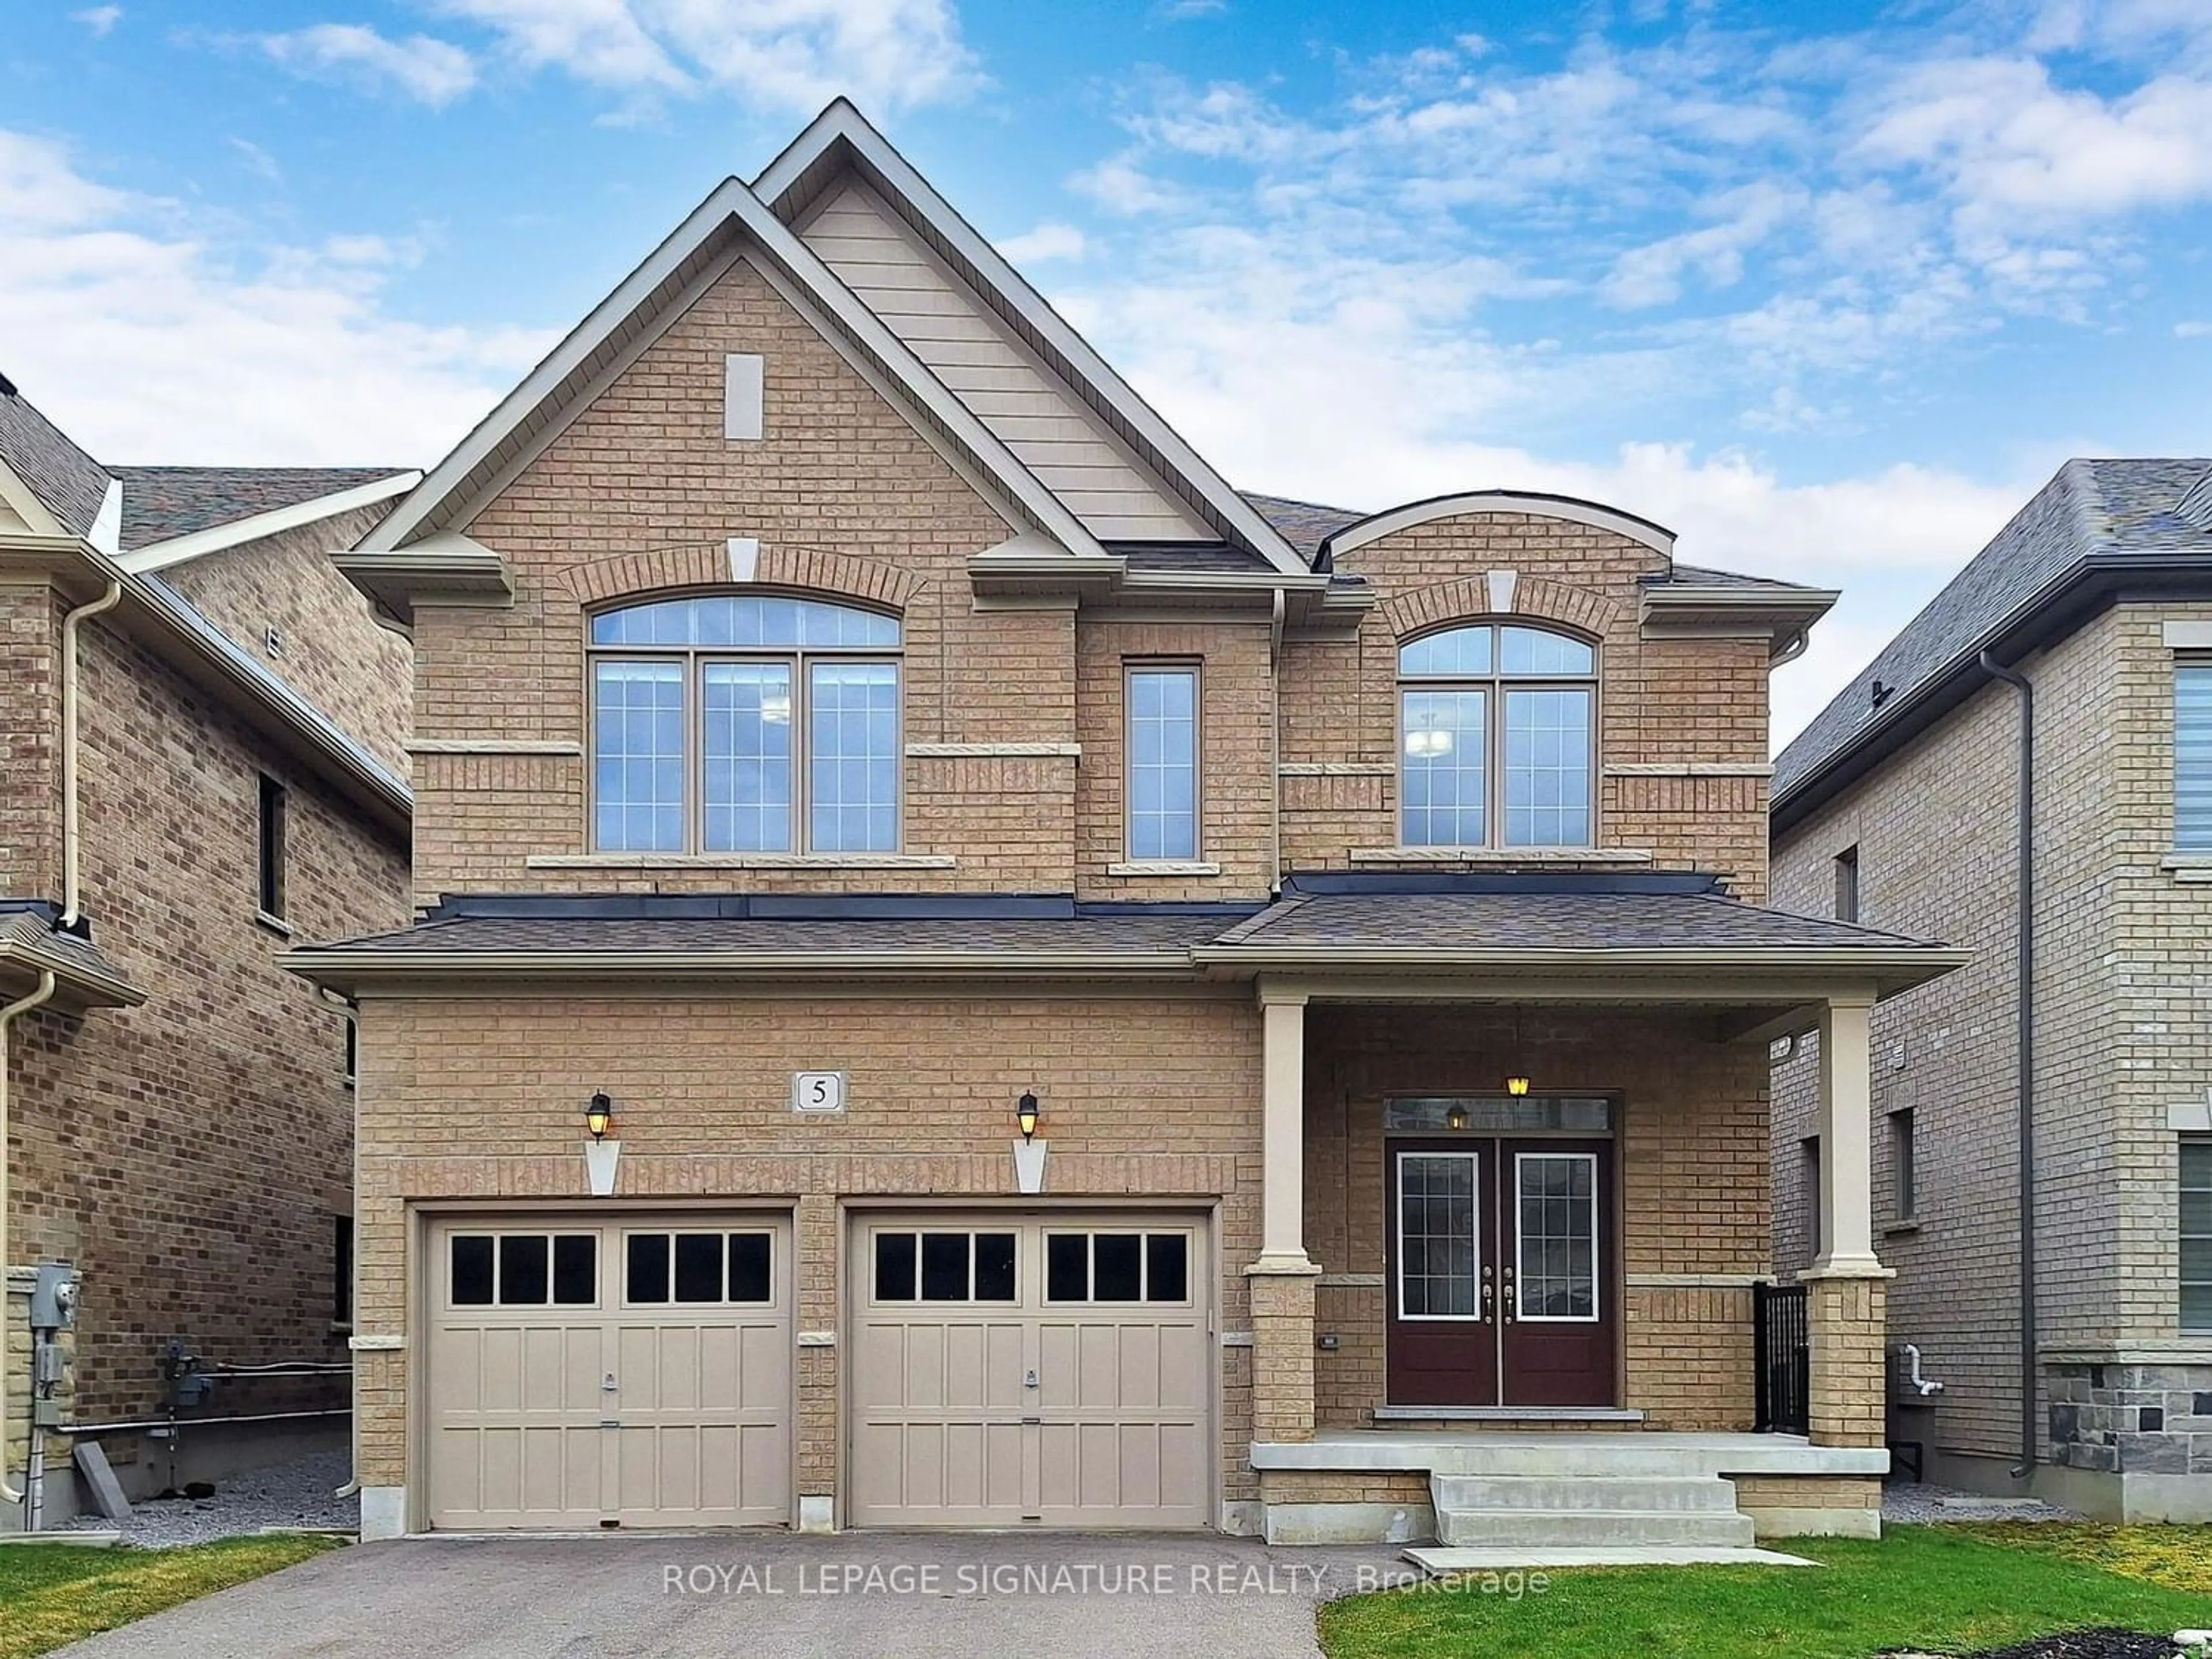 Home with brick exterior material for 5 Baleberry Cres, East Gwillimbury Ontario L9N 0P2